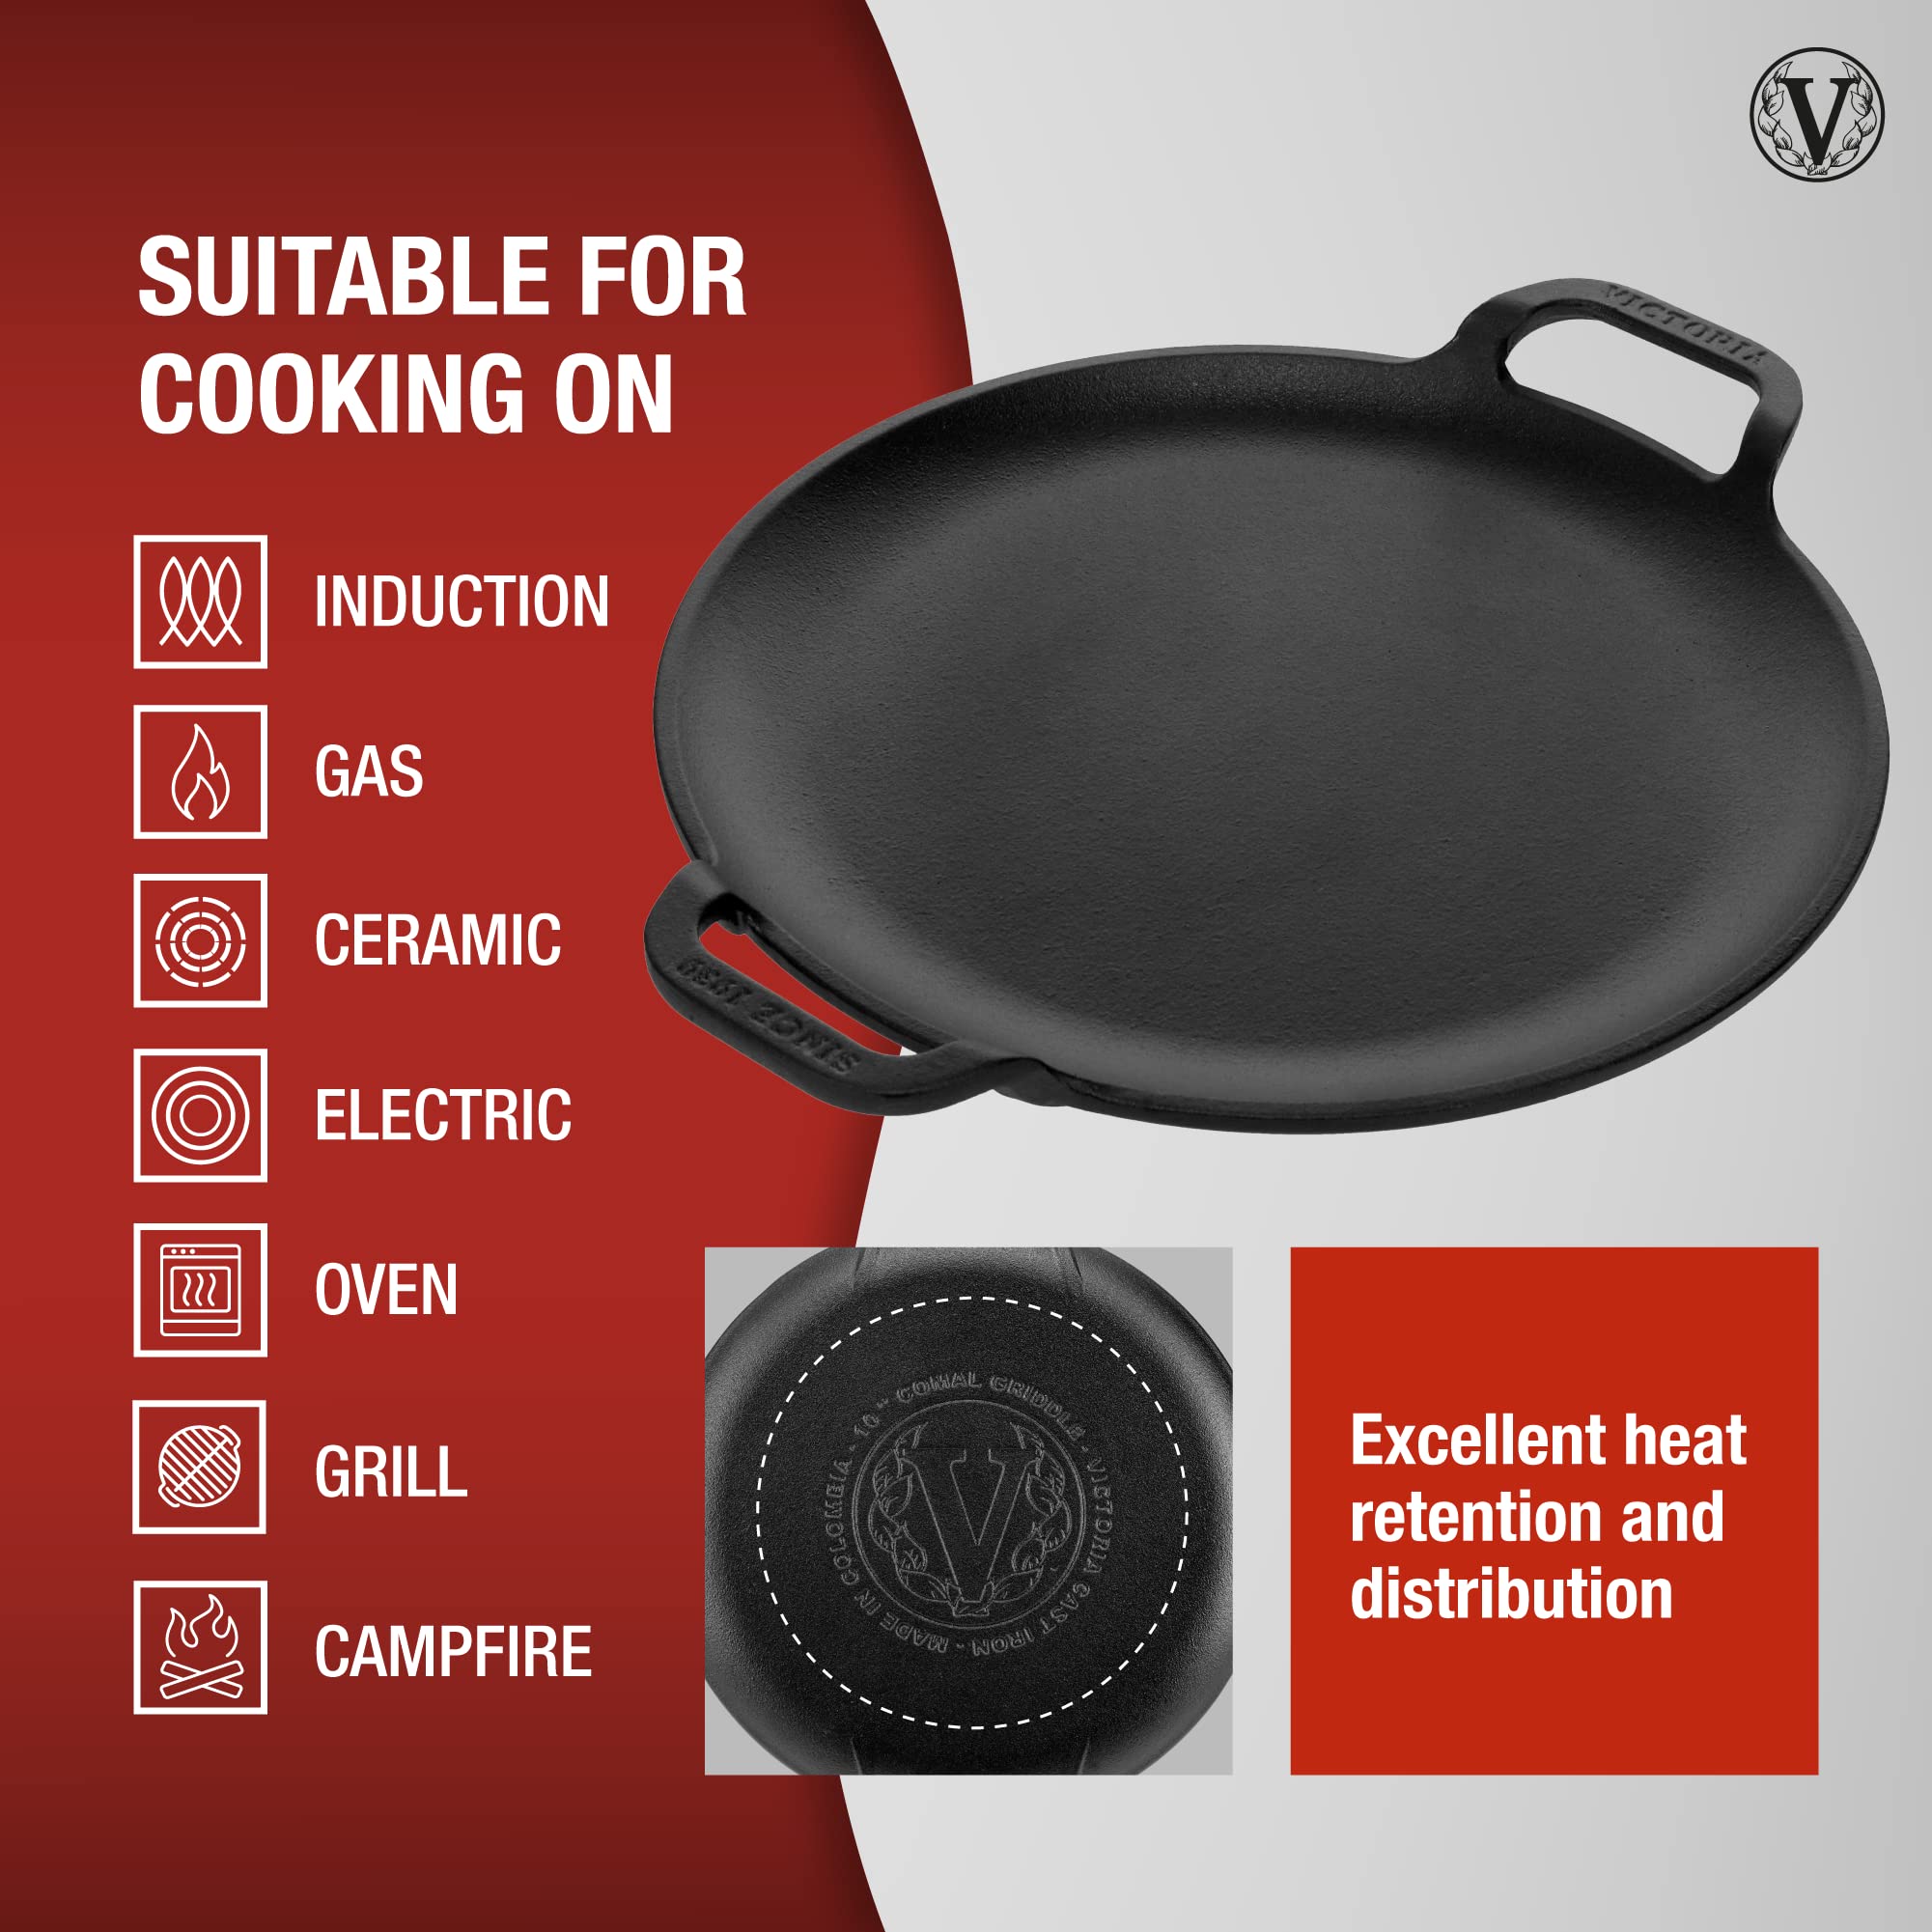 Victoria 10-Inch Cast-Iron Comal Pizza Pan with 2 Side Handles, Preseasoned with Flaxseed Oil, Made in Colombia